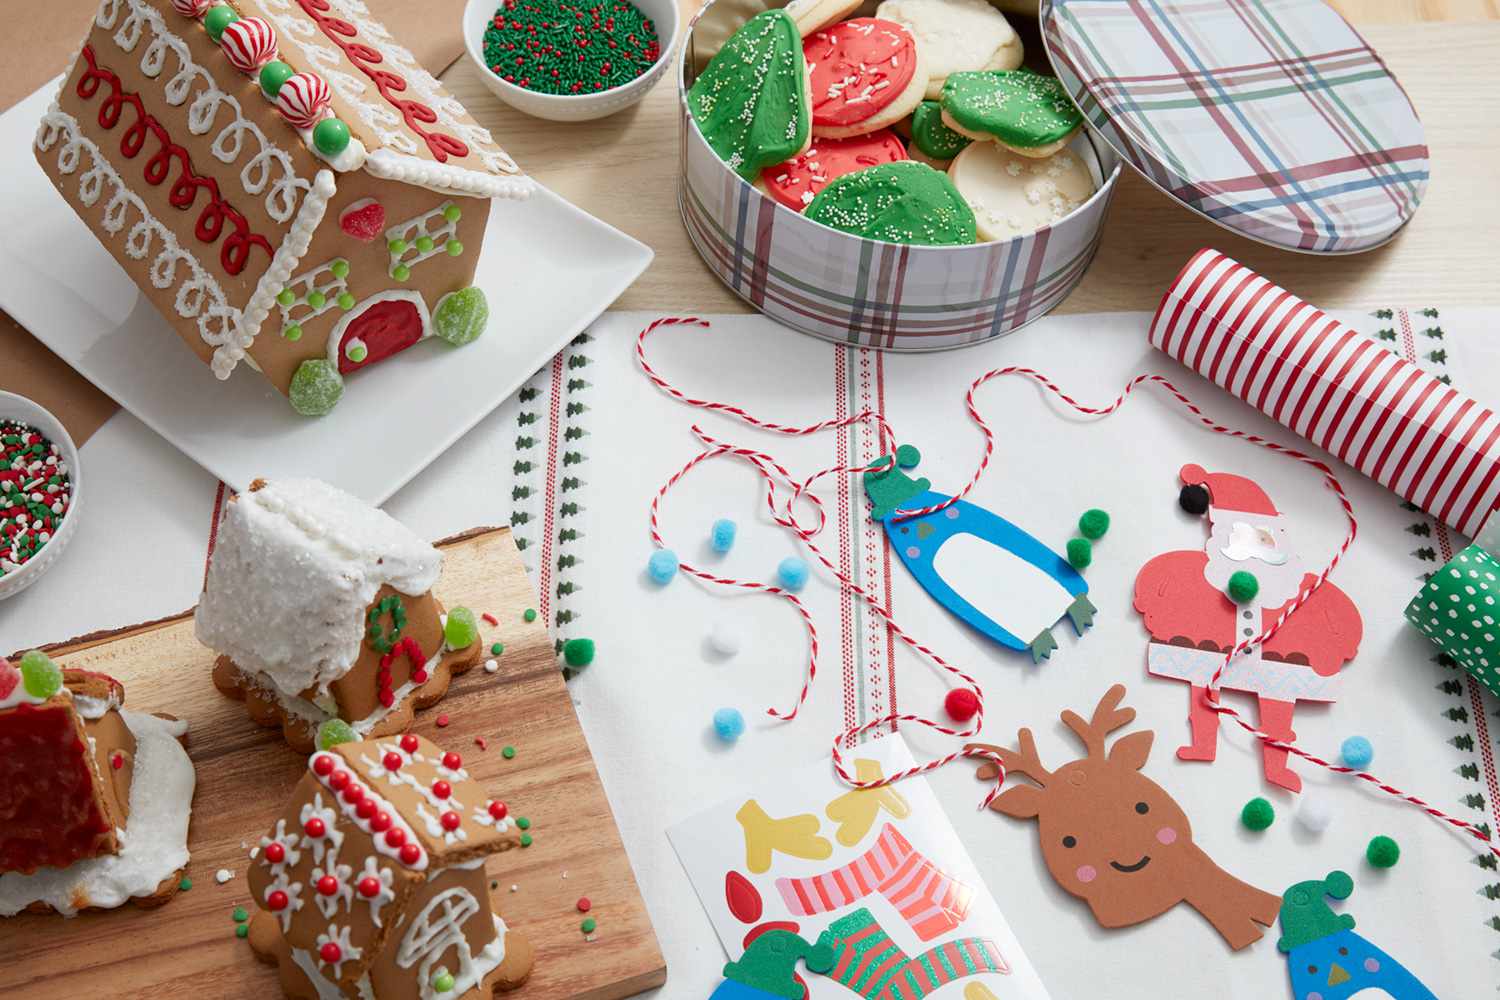 Kids Christmas party gingerbread houses and crafts